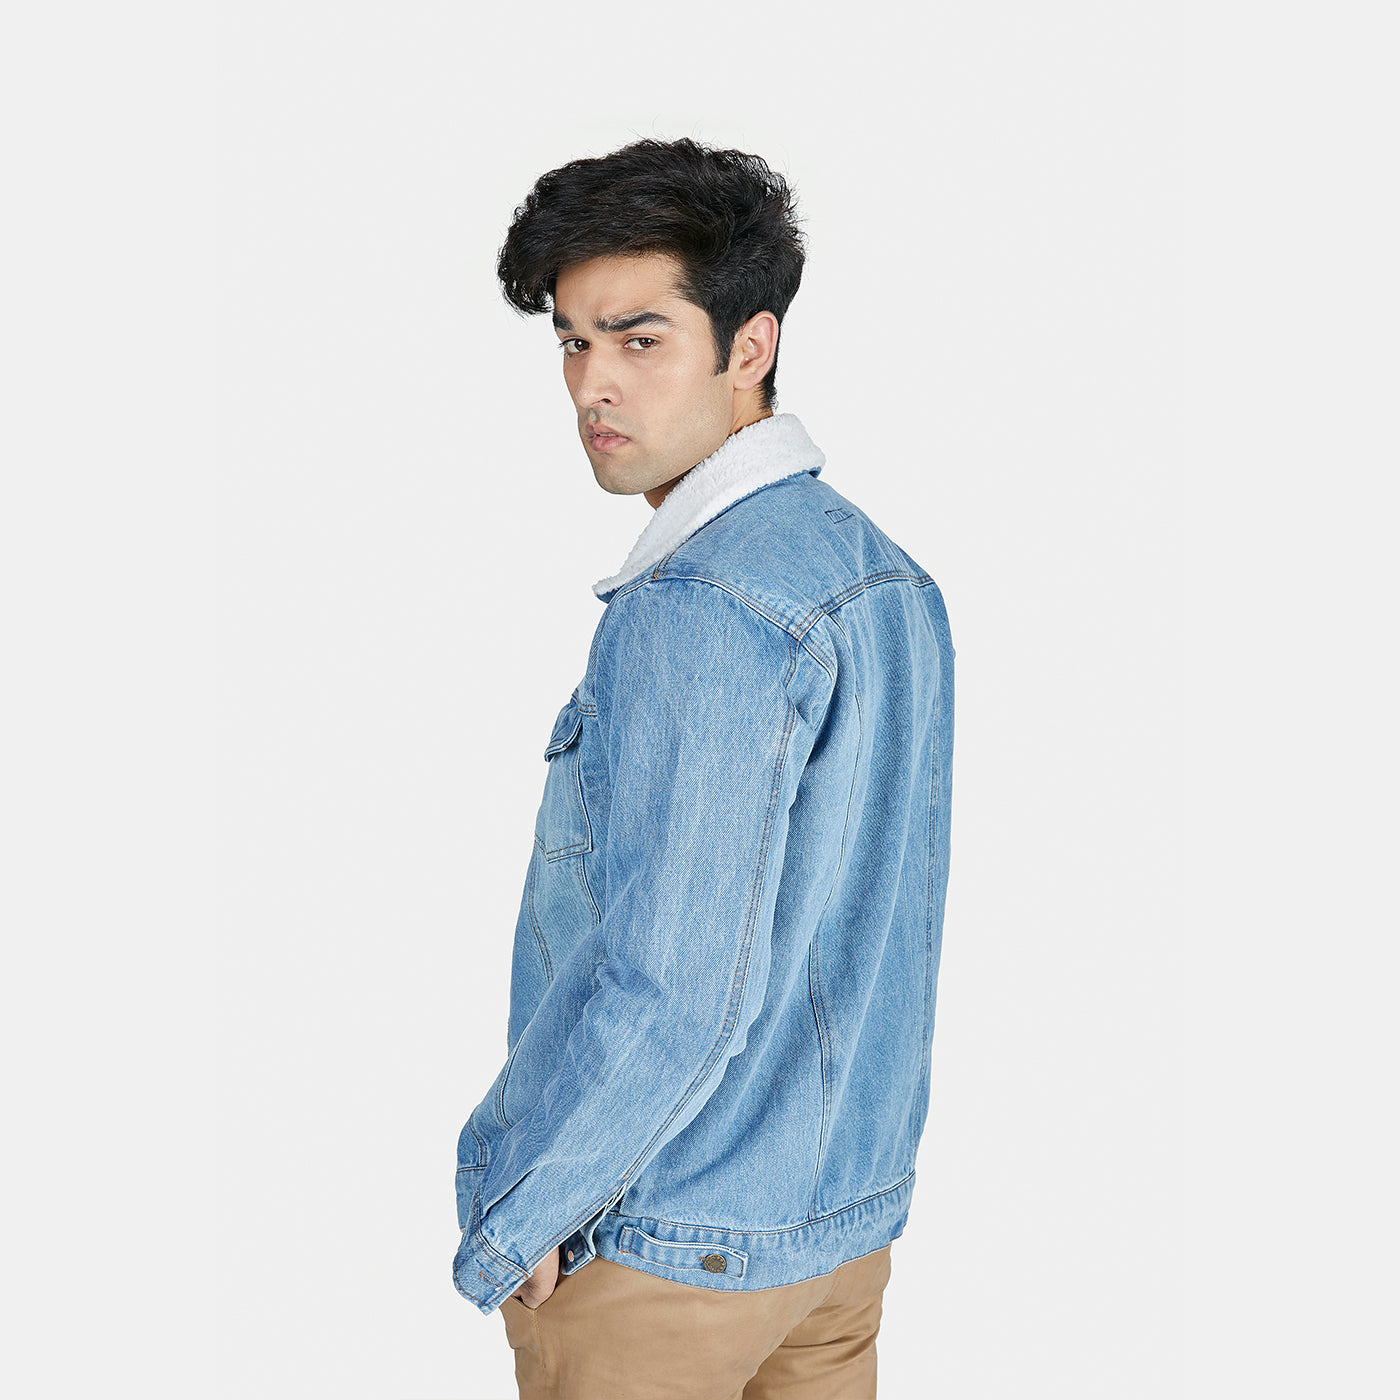 How To Wear A Denim Jacket For Men: Outfit And Style Guide 2024 |  FashionBeans